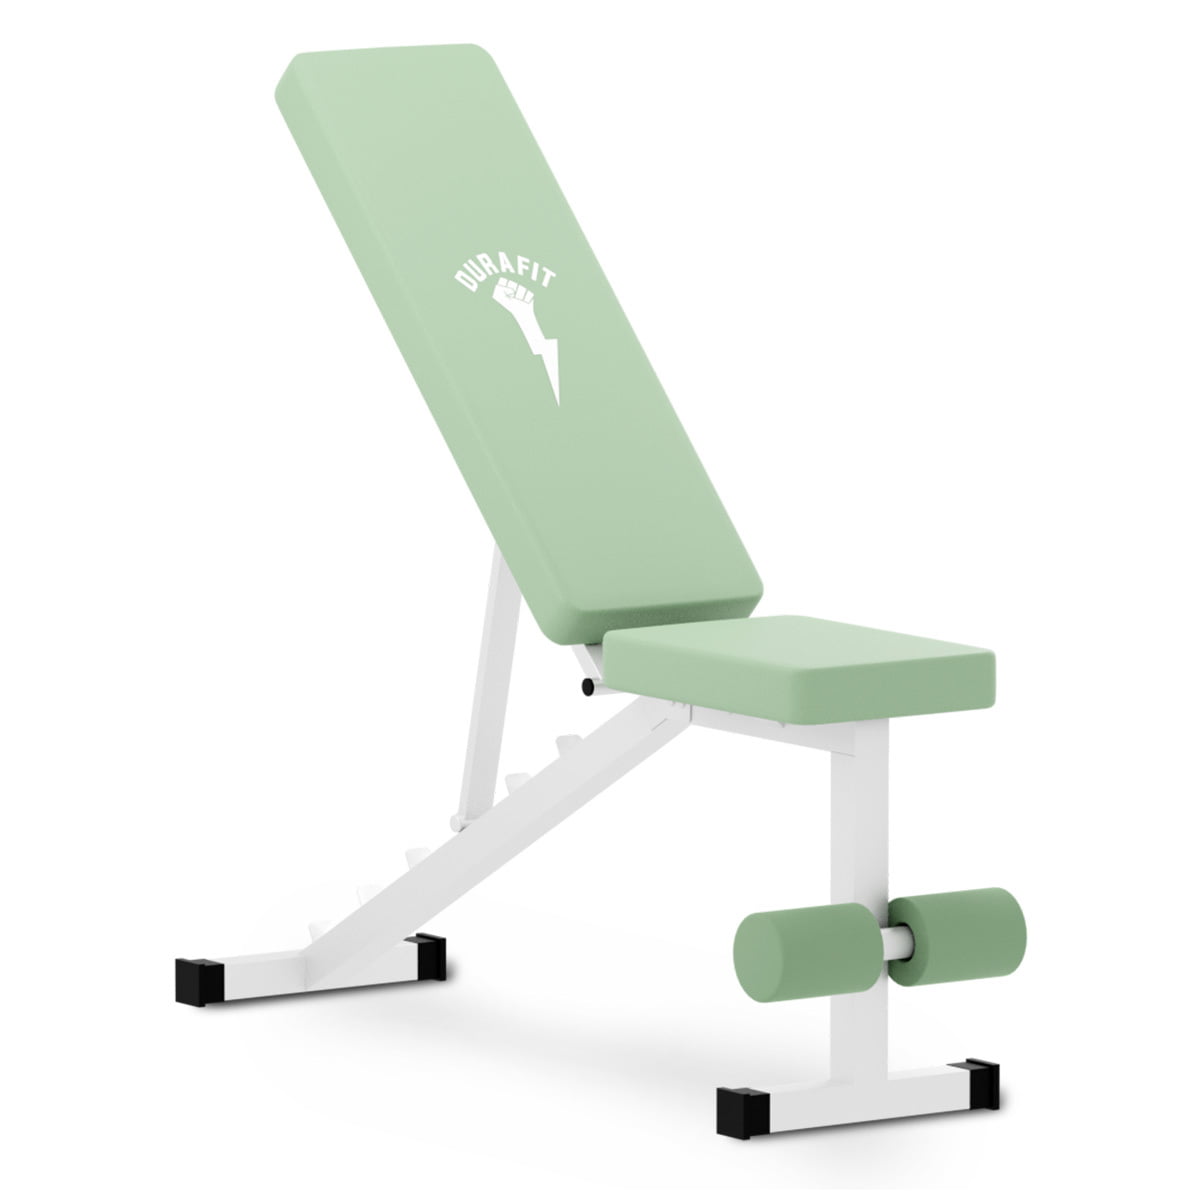 Durafit Foldable Bench Green